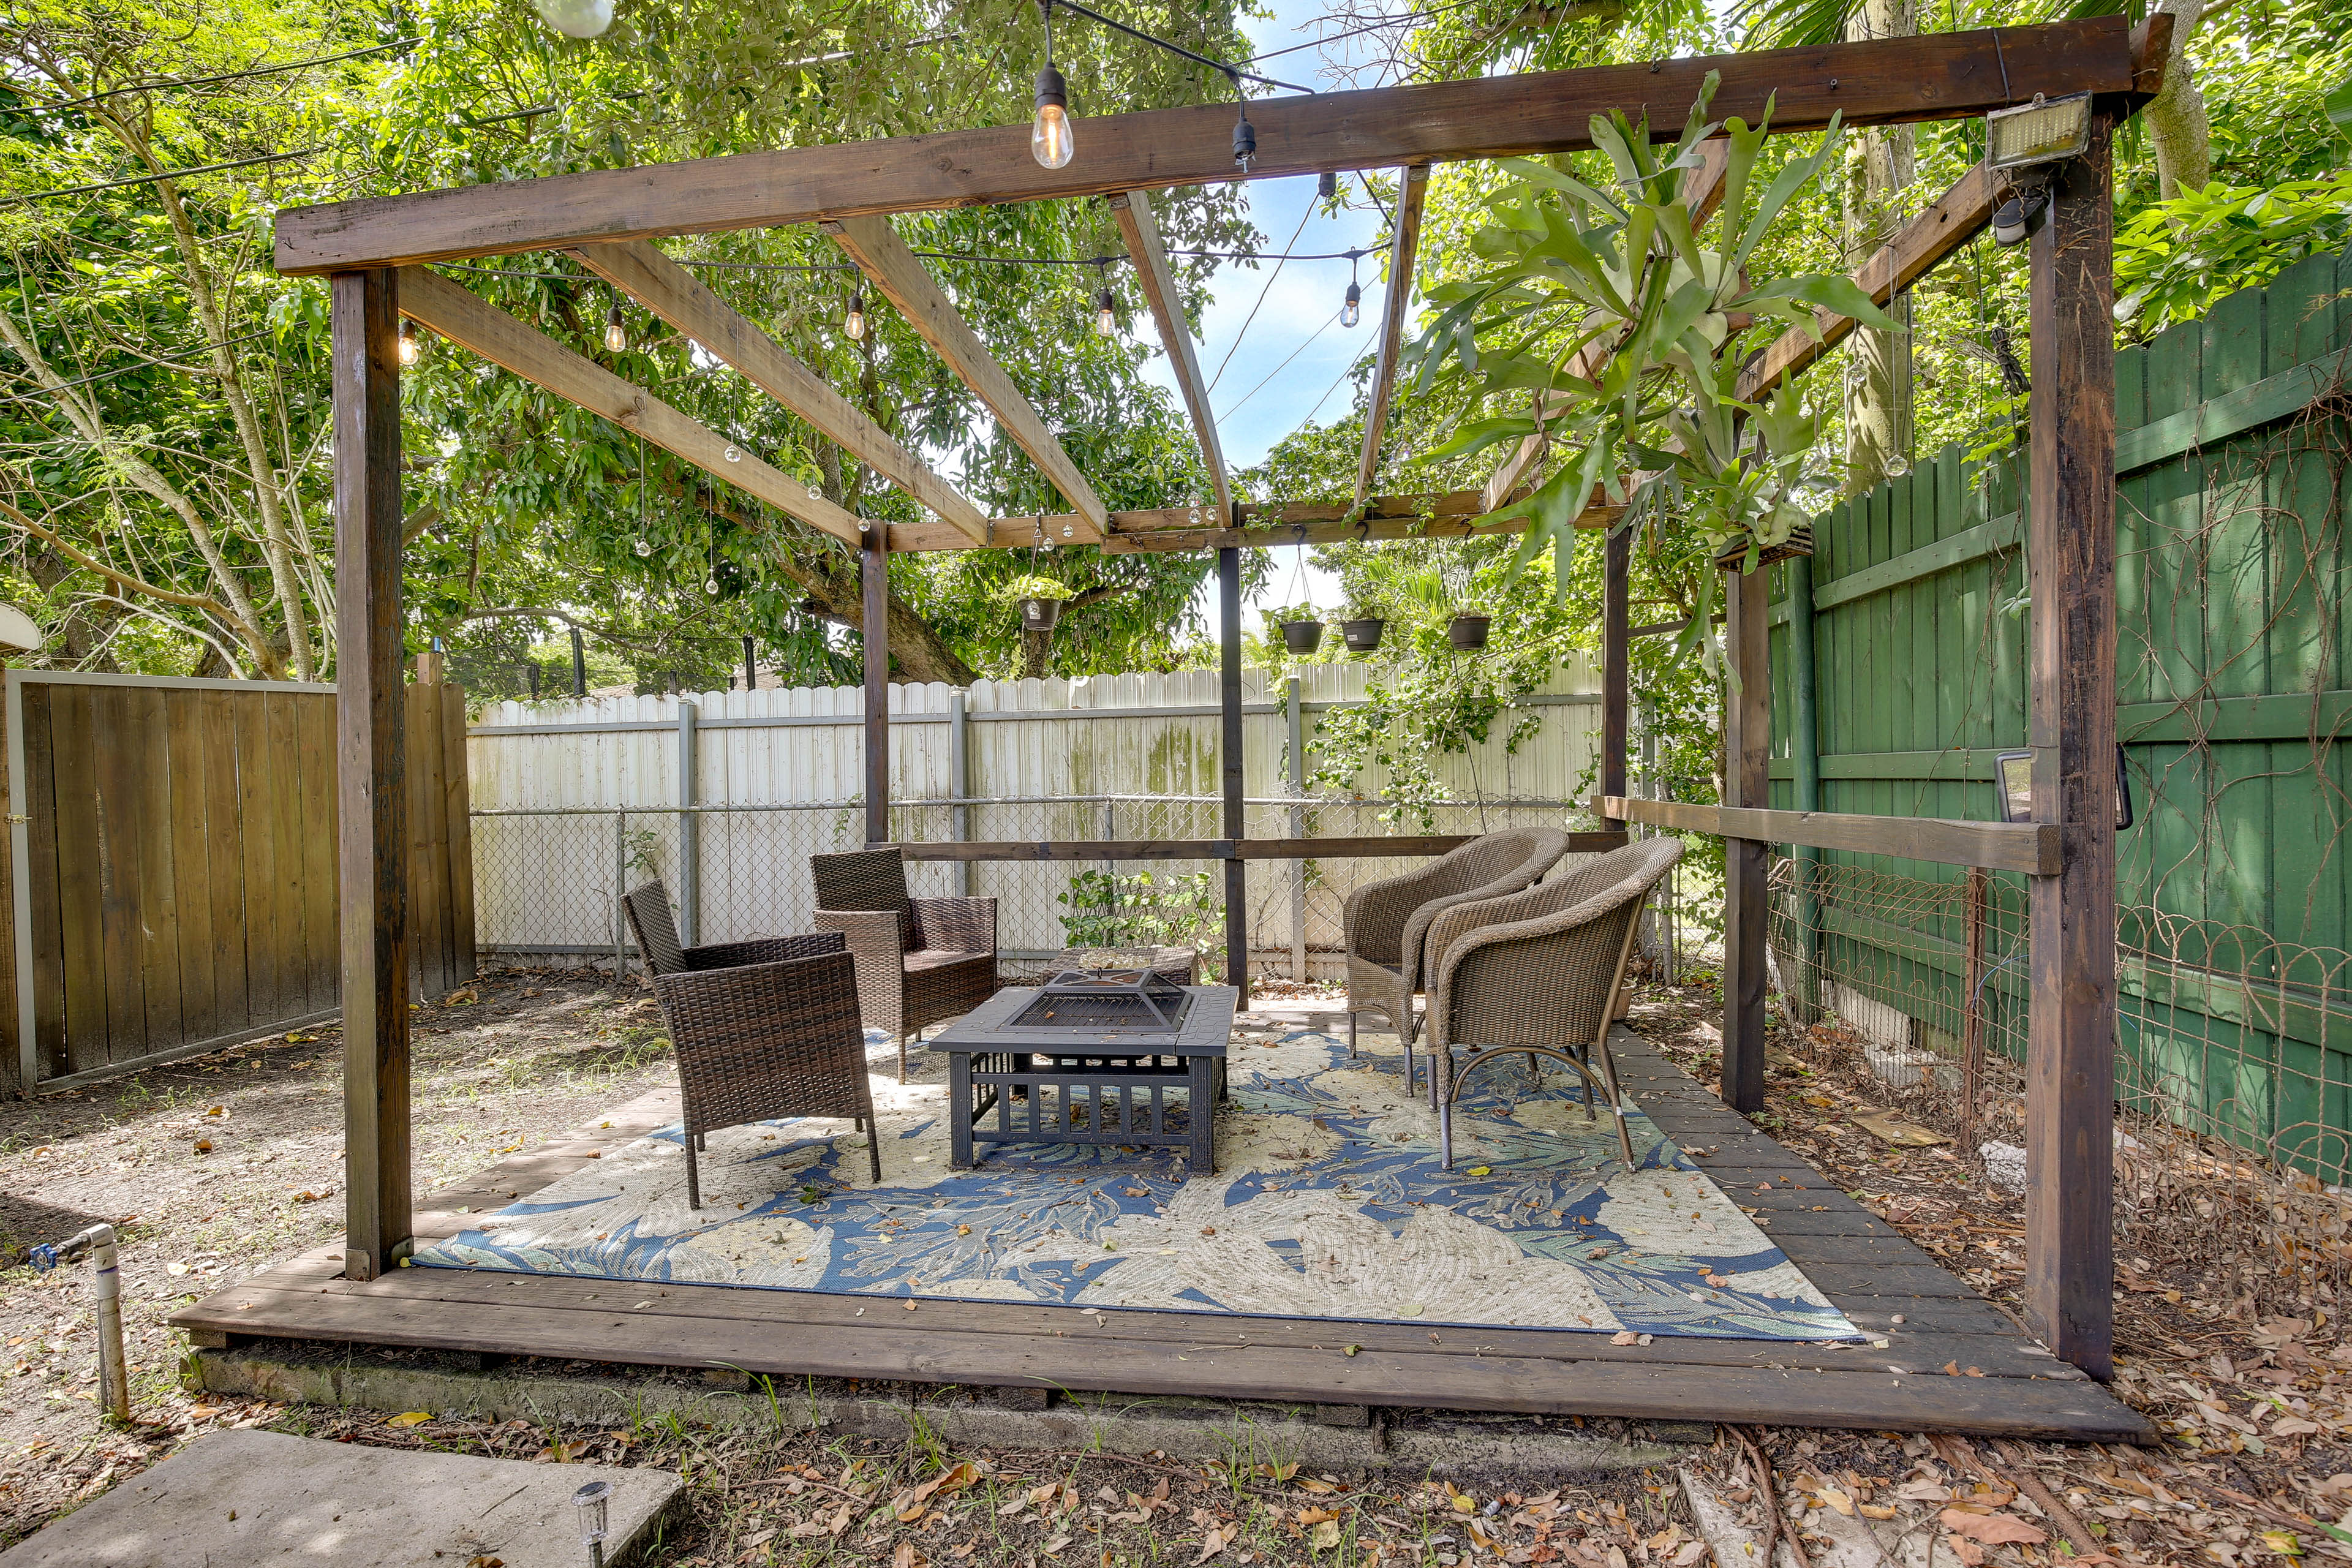 Pergola/Deck | Outdoor Seating | Fire Pit